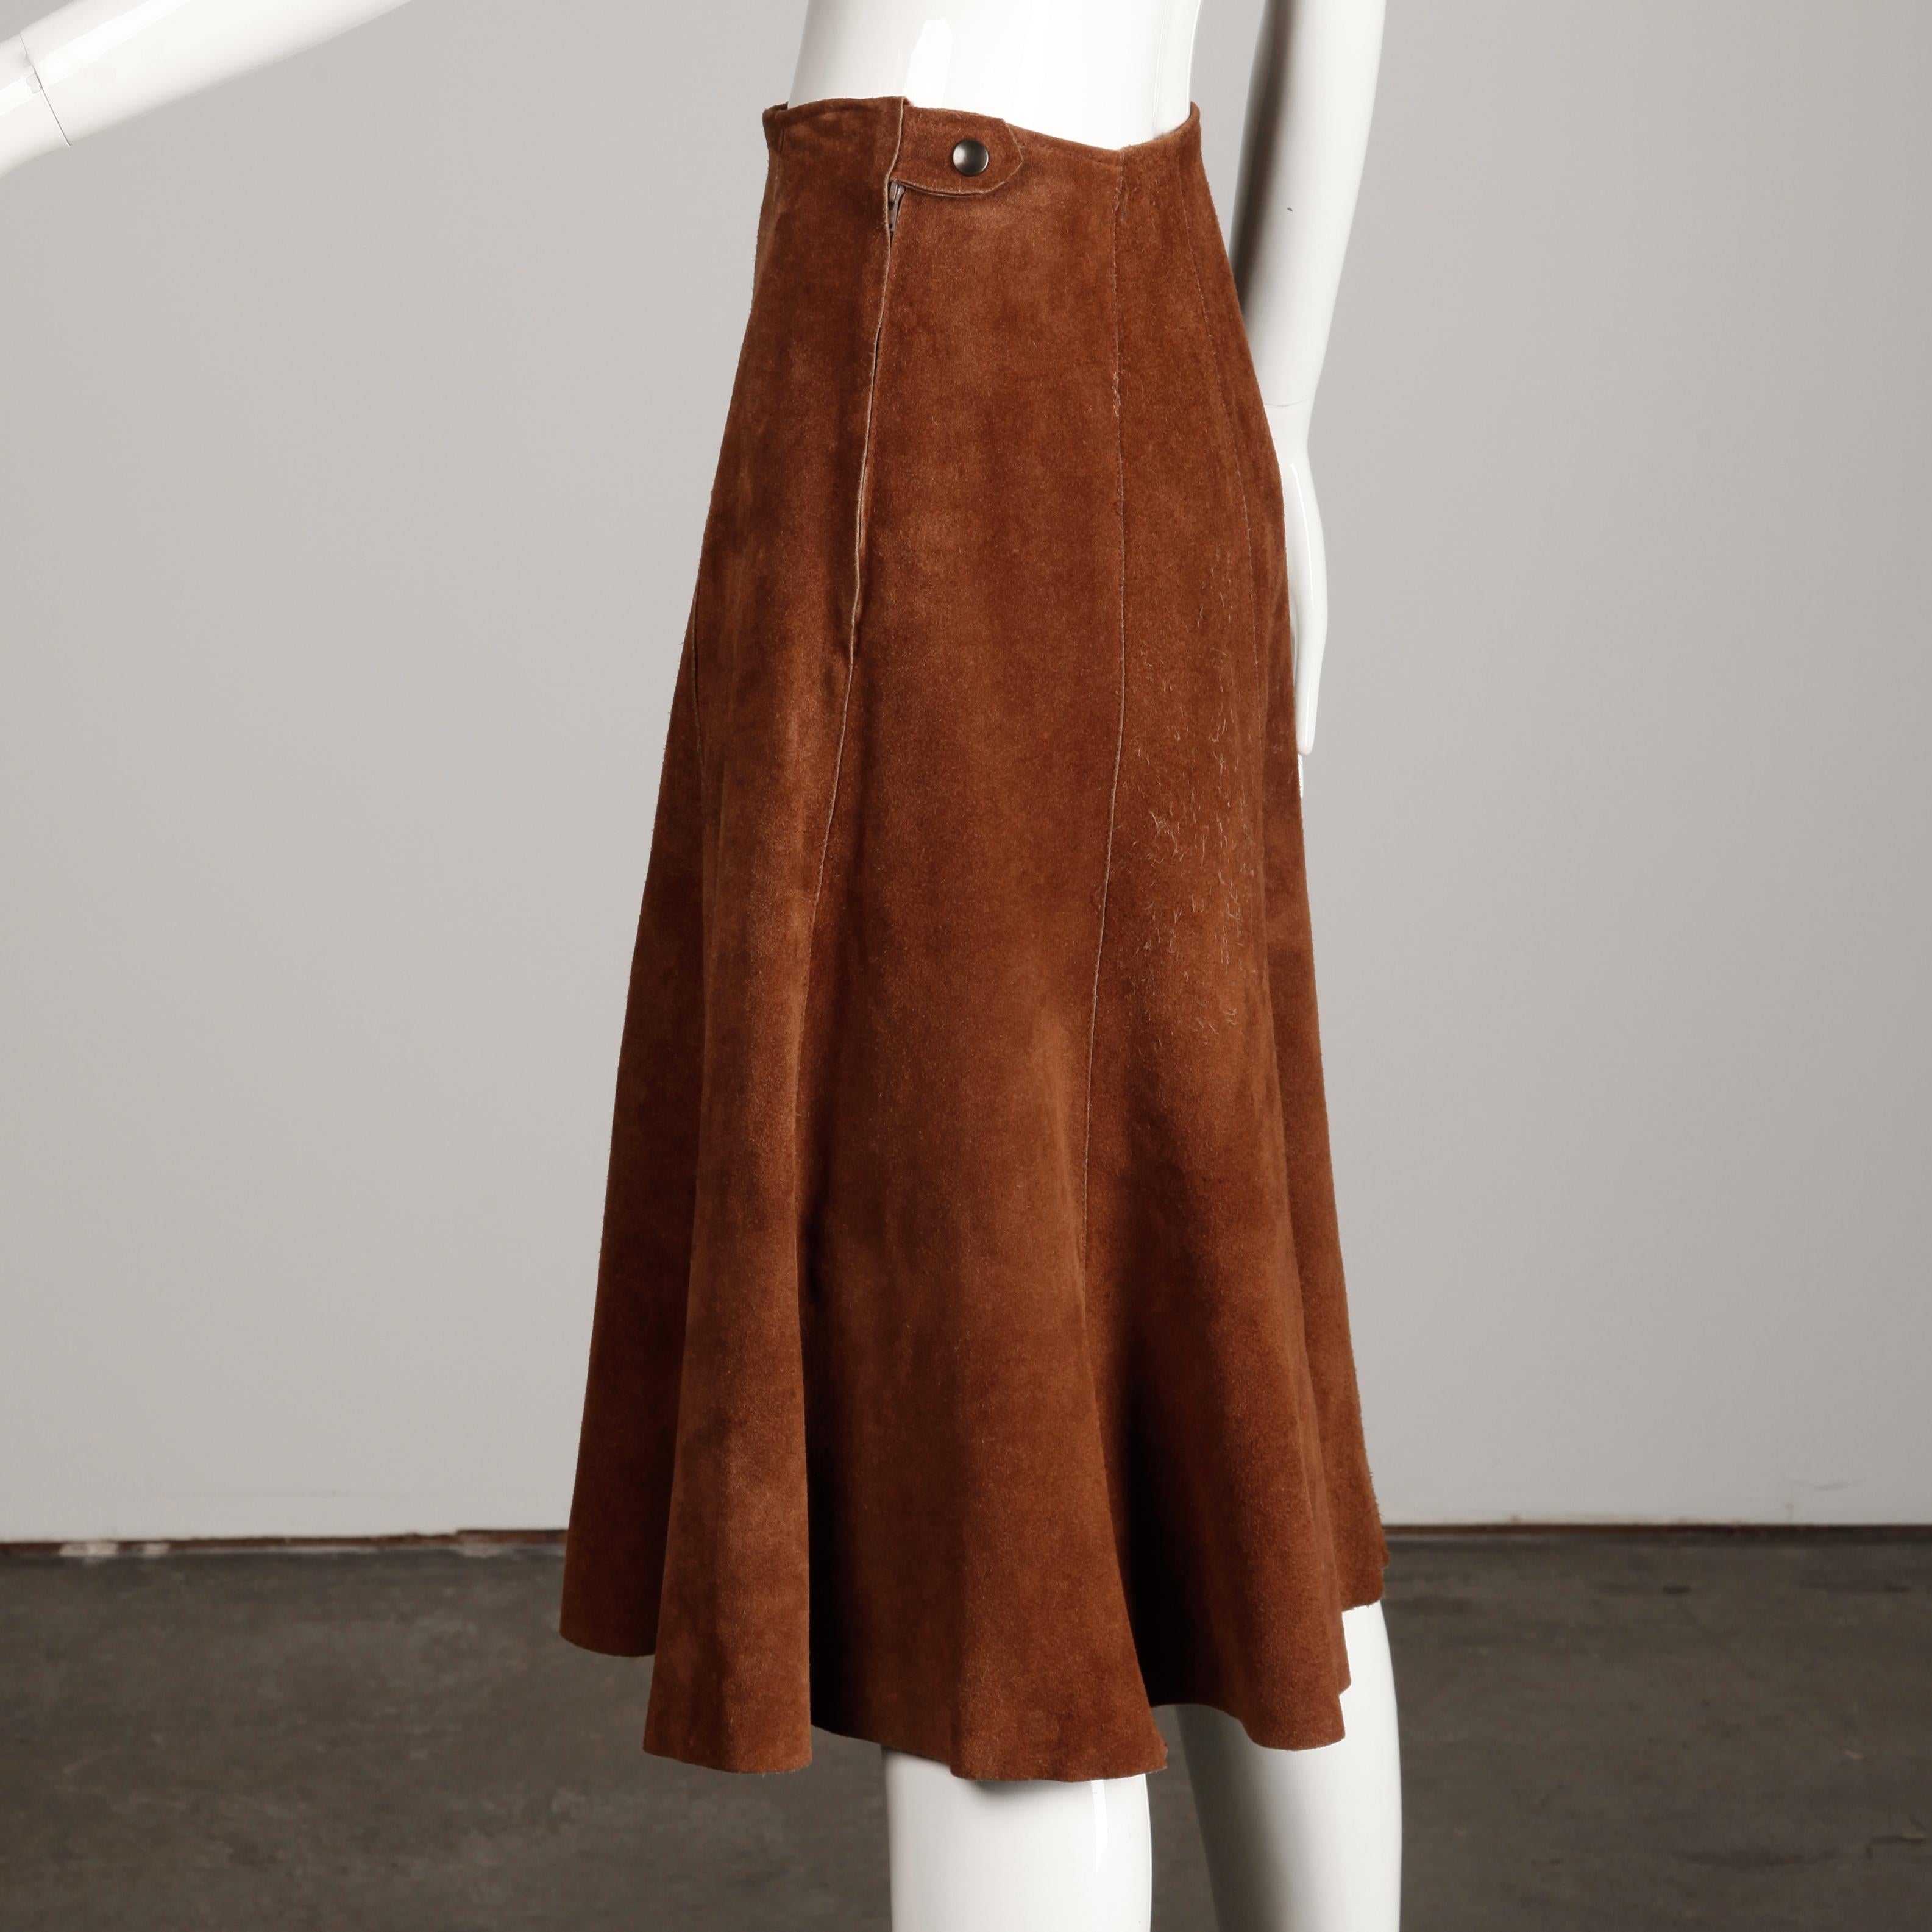 1970s Vintage Suede Leather Jacket + Skirt Ensemble In Excellent Condition For Sale In Sparks, NV